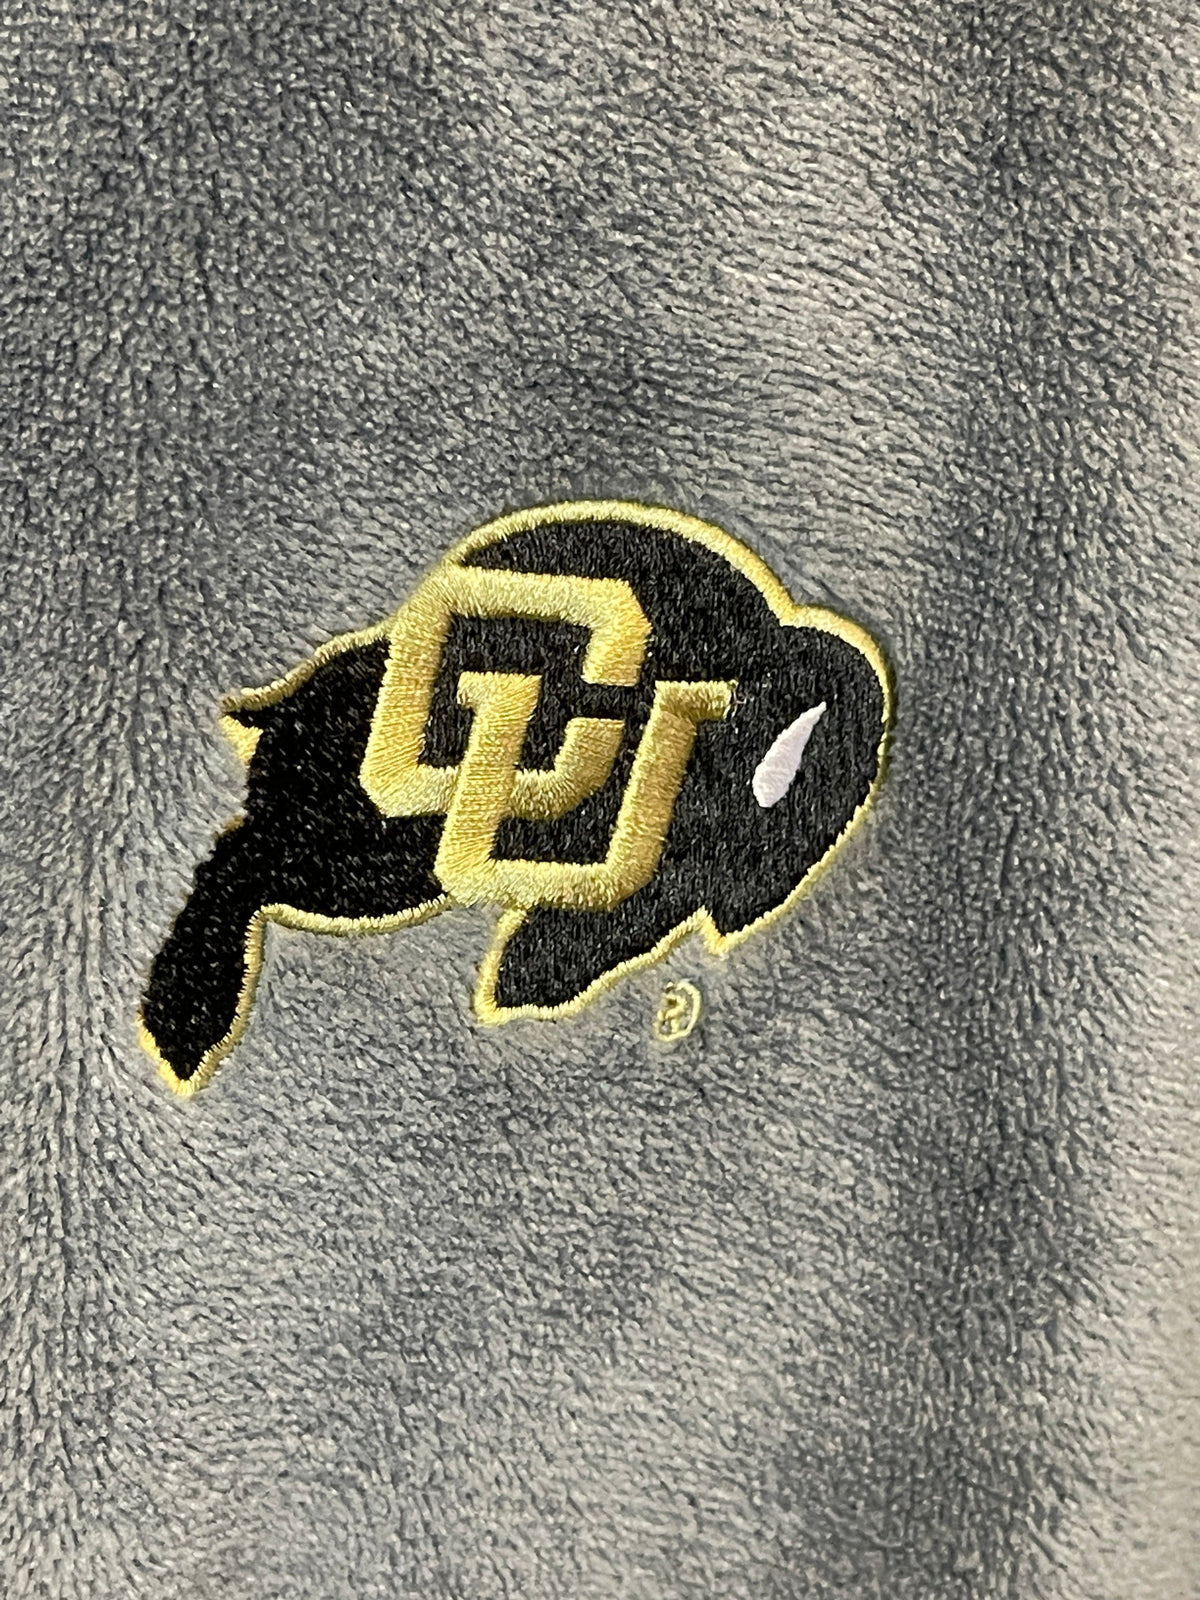 NCAA Colorado Buffaloes Soft & Cosy Bathrobe/Dressing Gown Men's Large/X-Large